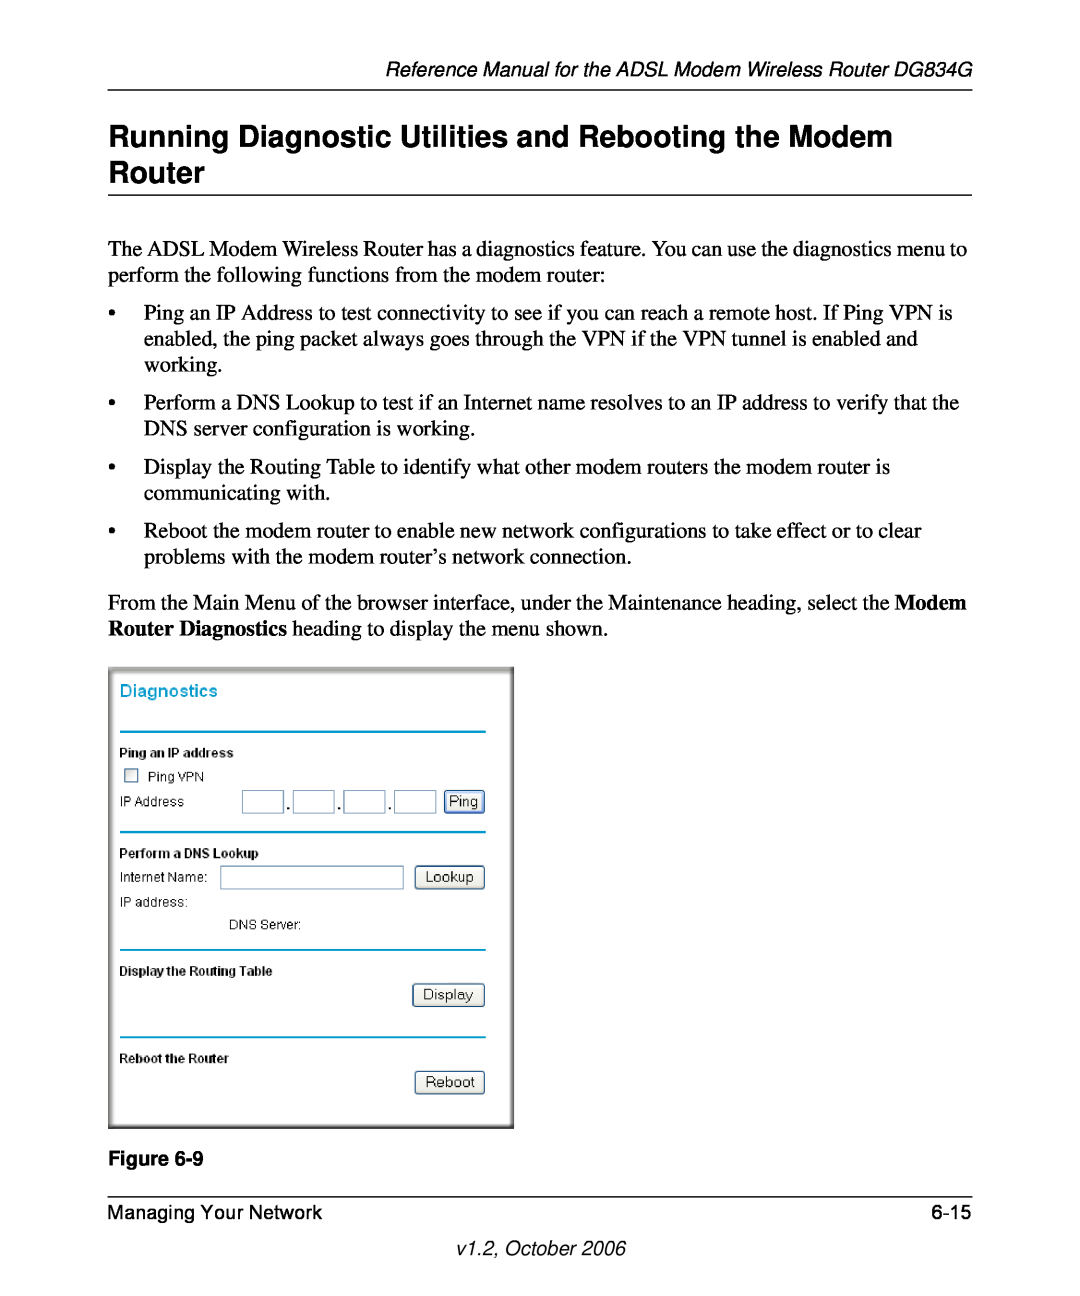 NETGEAR DG834G manual Running Diagnostic Utilities and Rebooting the Modem Router 